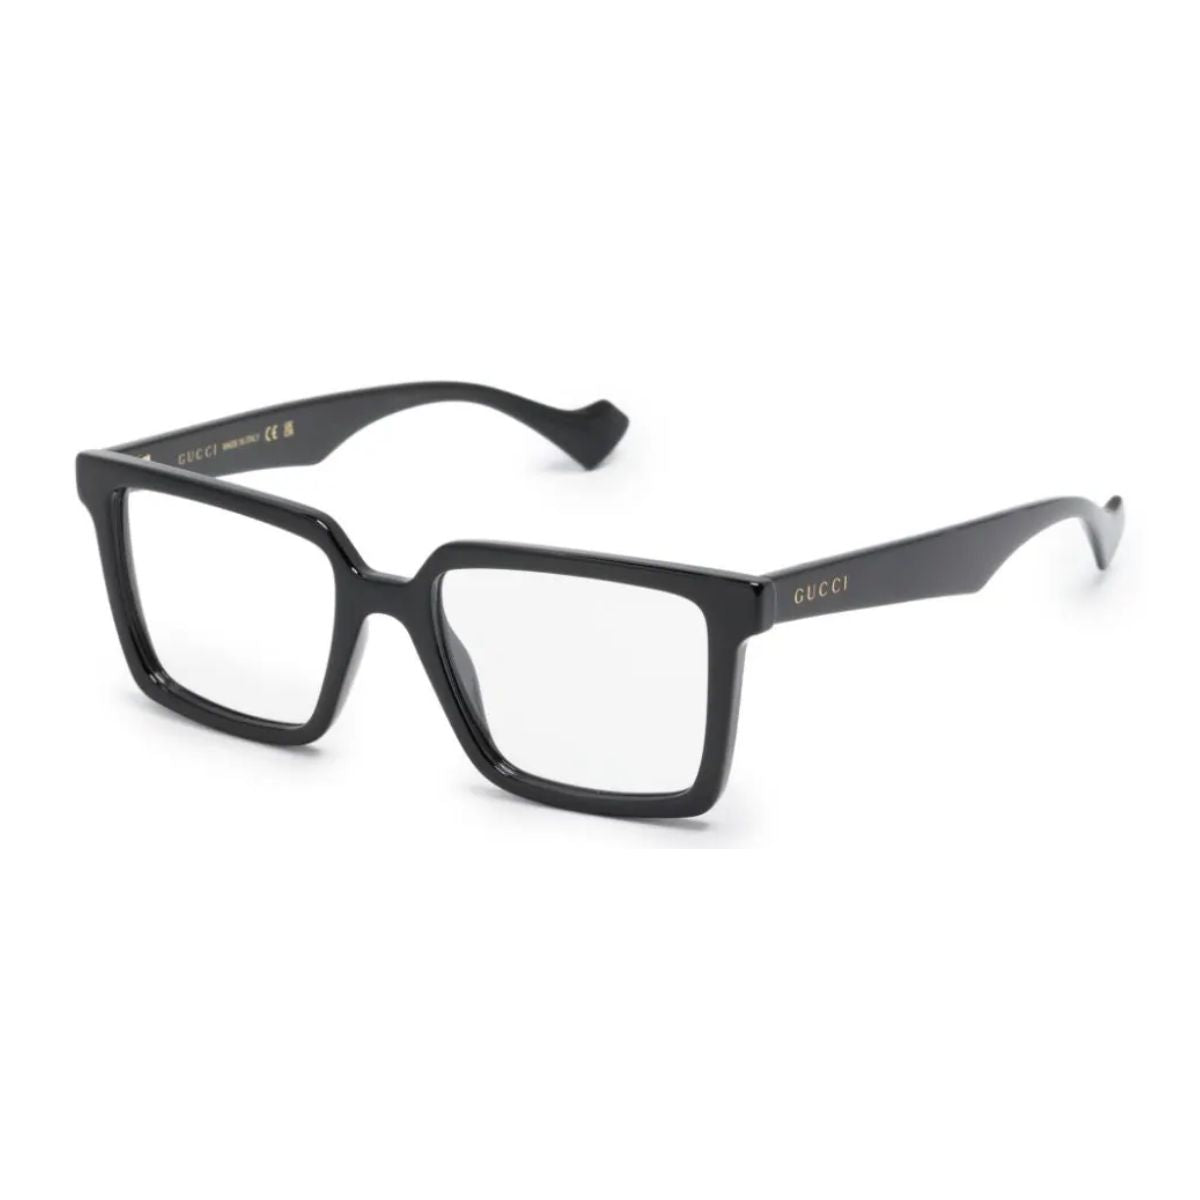 "Sophisticated Gucci 1540O 001 eyewear collection for men, featuring designer frames and glasses."